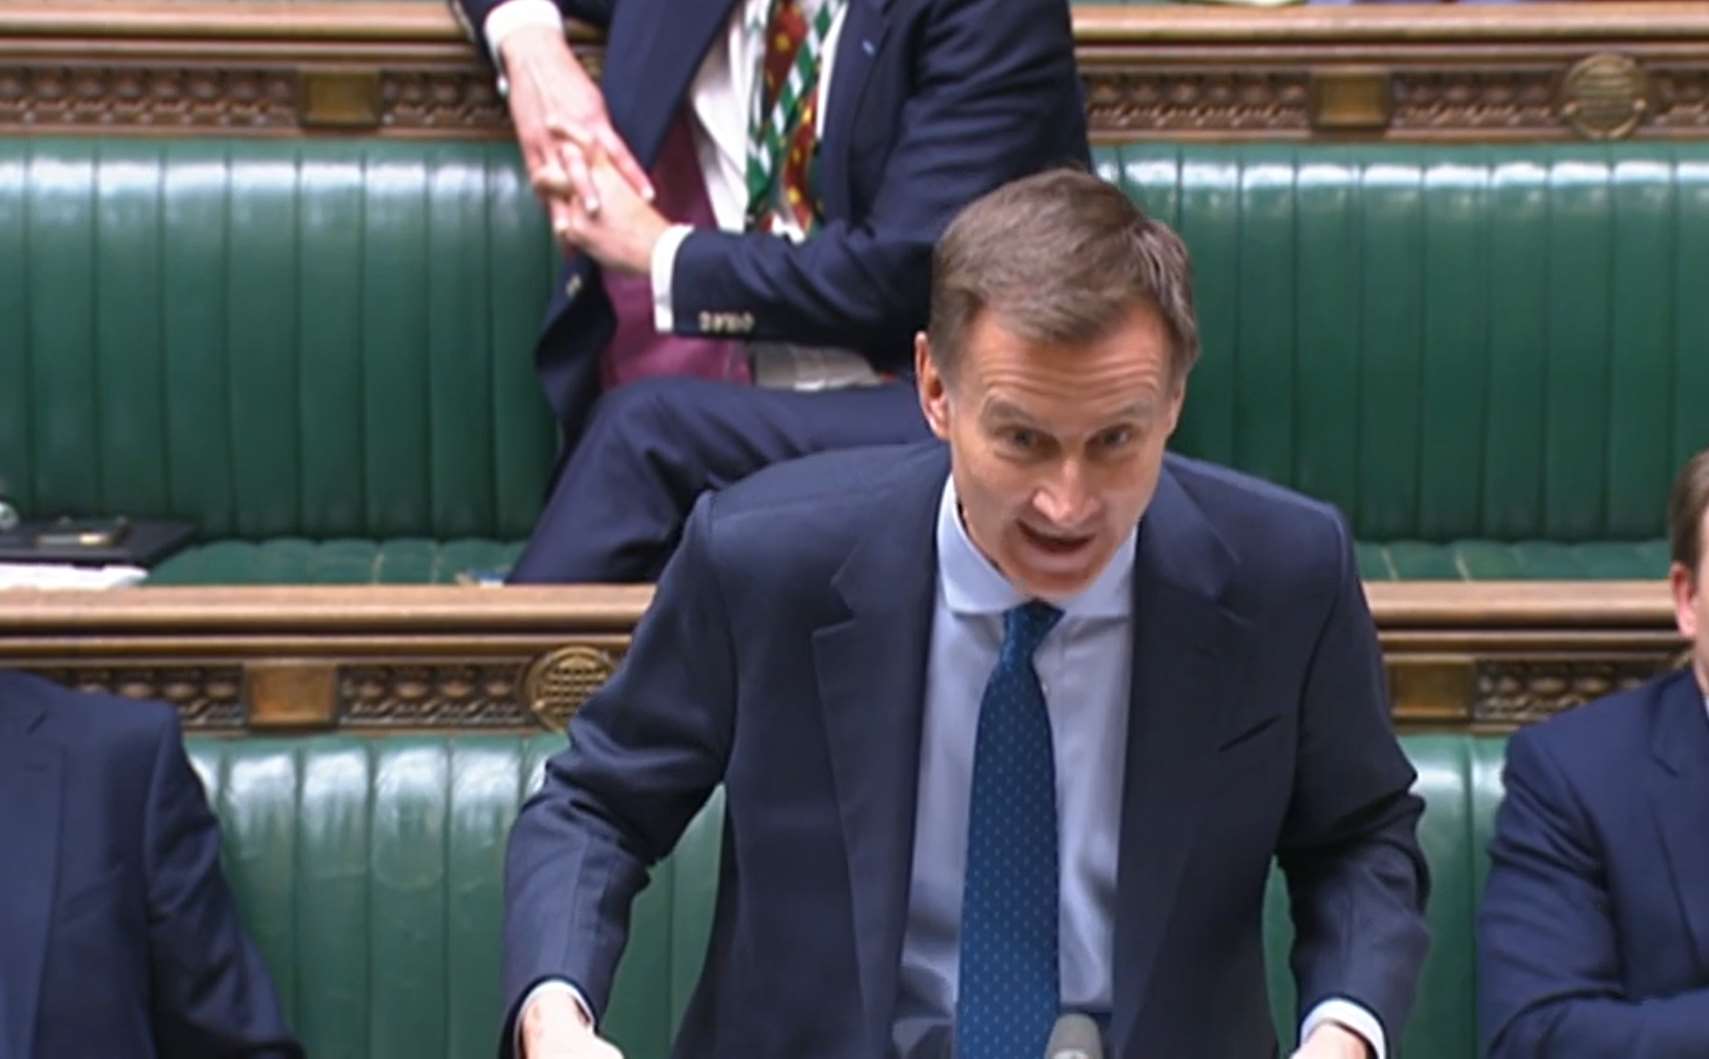 Chancellor Jeremy Hunt said data suggests living standards will be at their pre-Covid peak next year (PA)